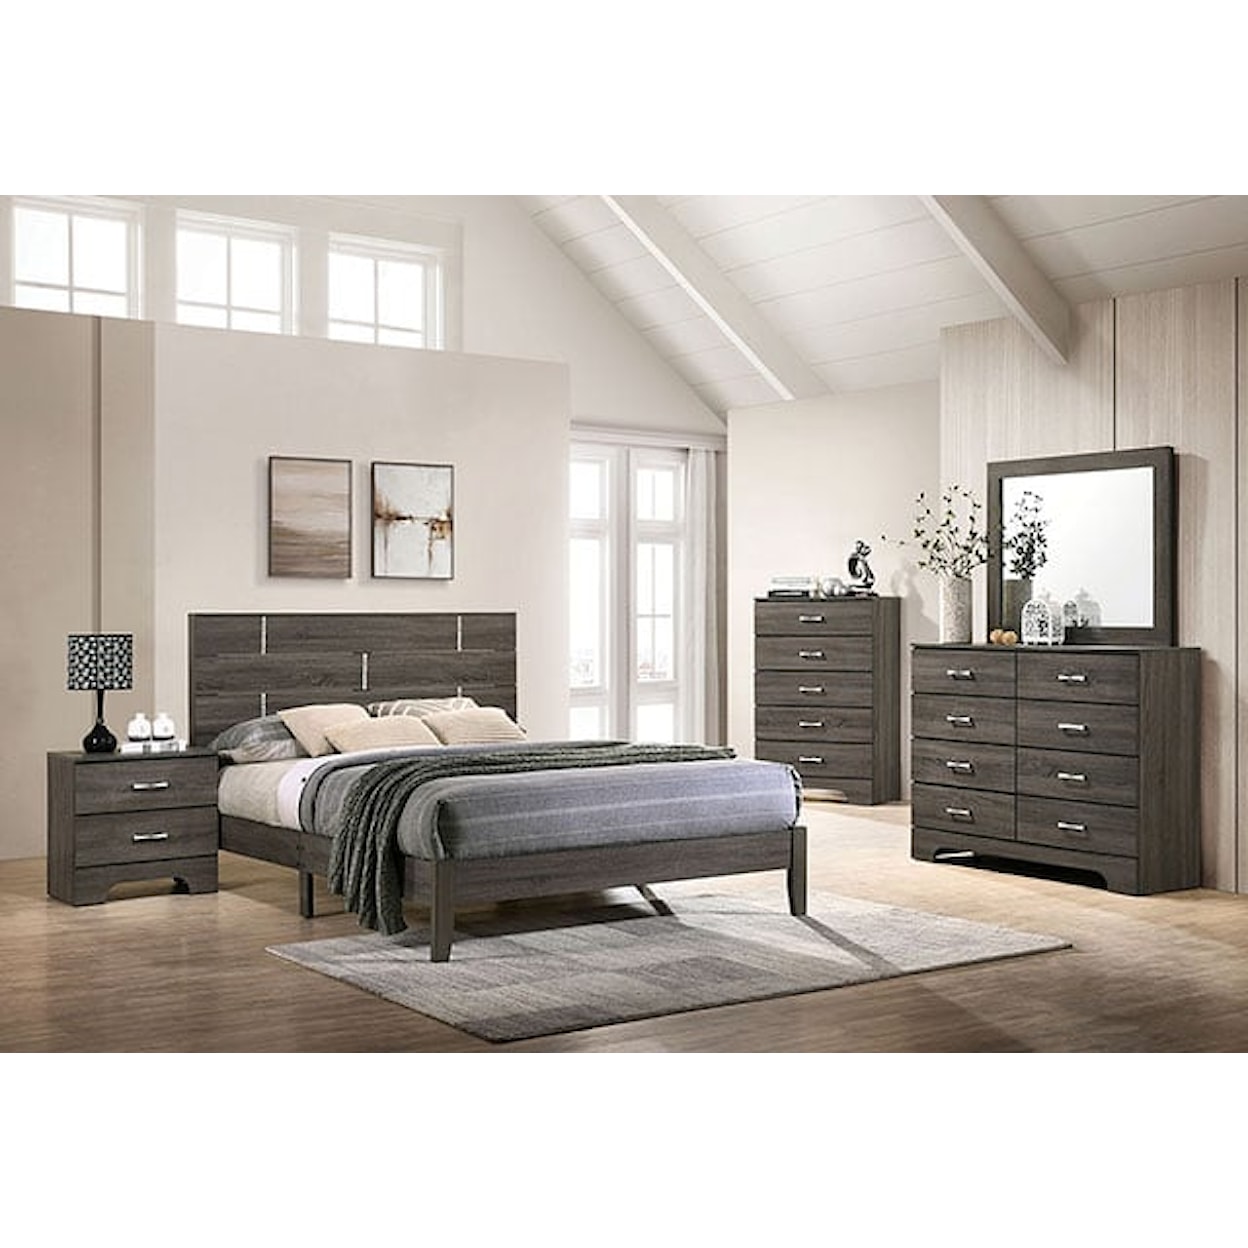 Furniture of America - FOA Richterswil Queen Low Platform Bed